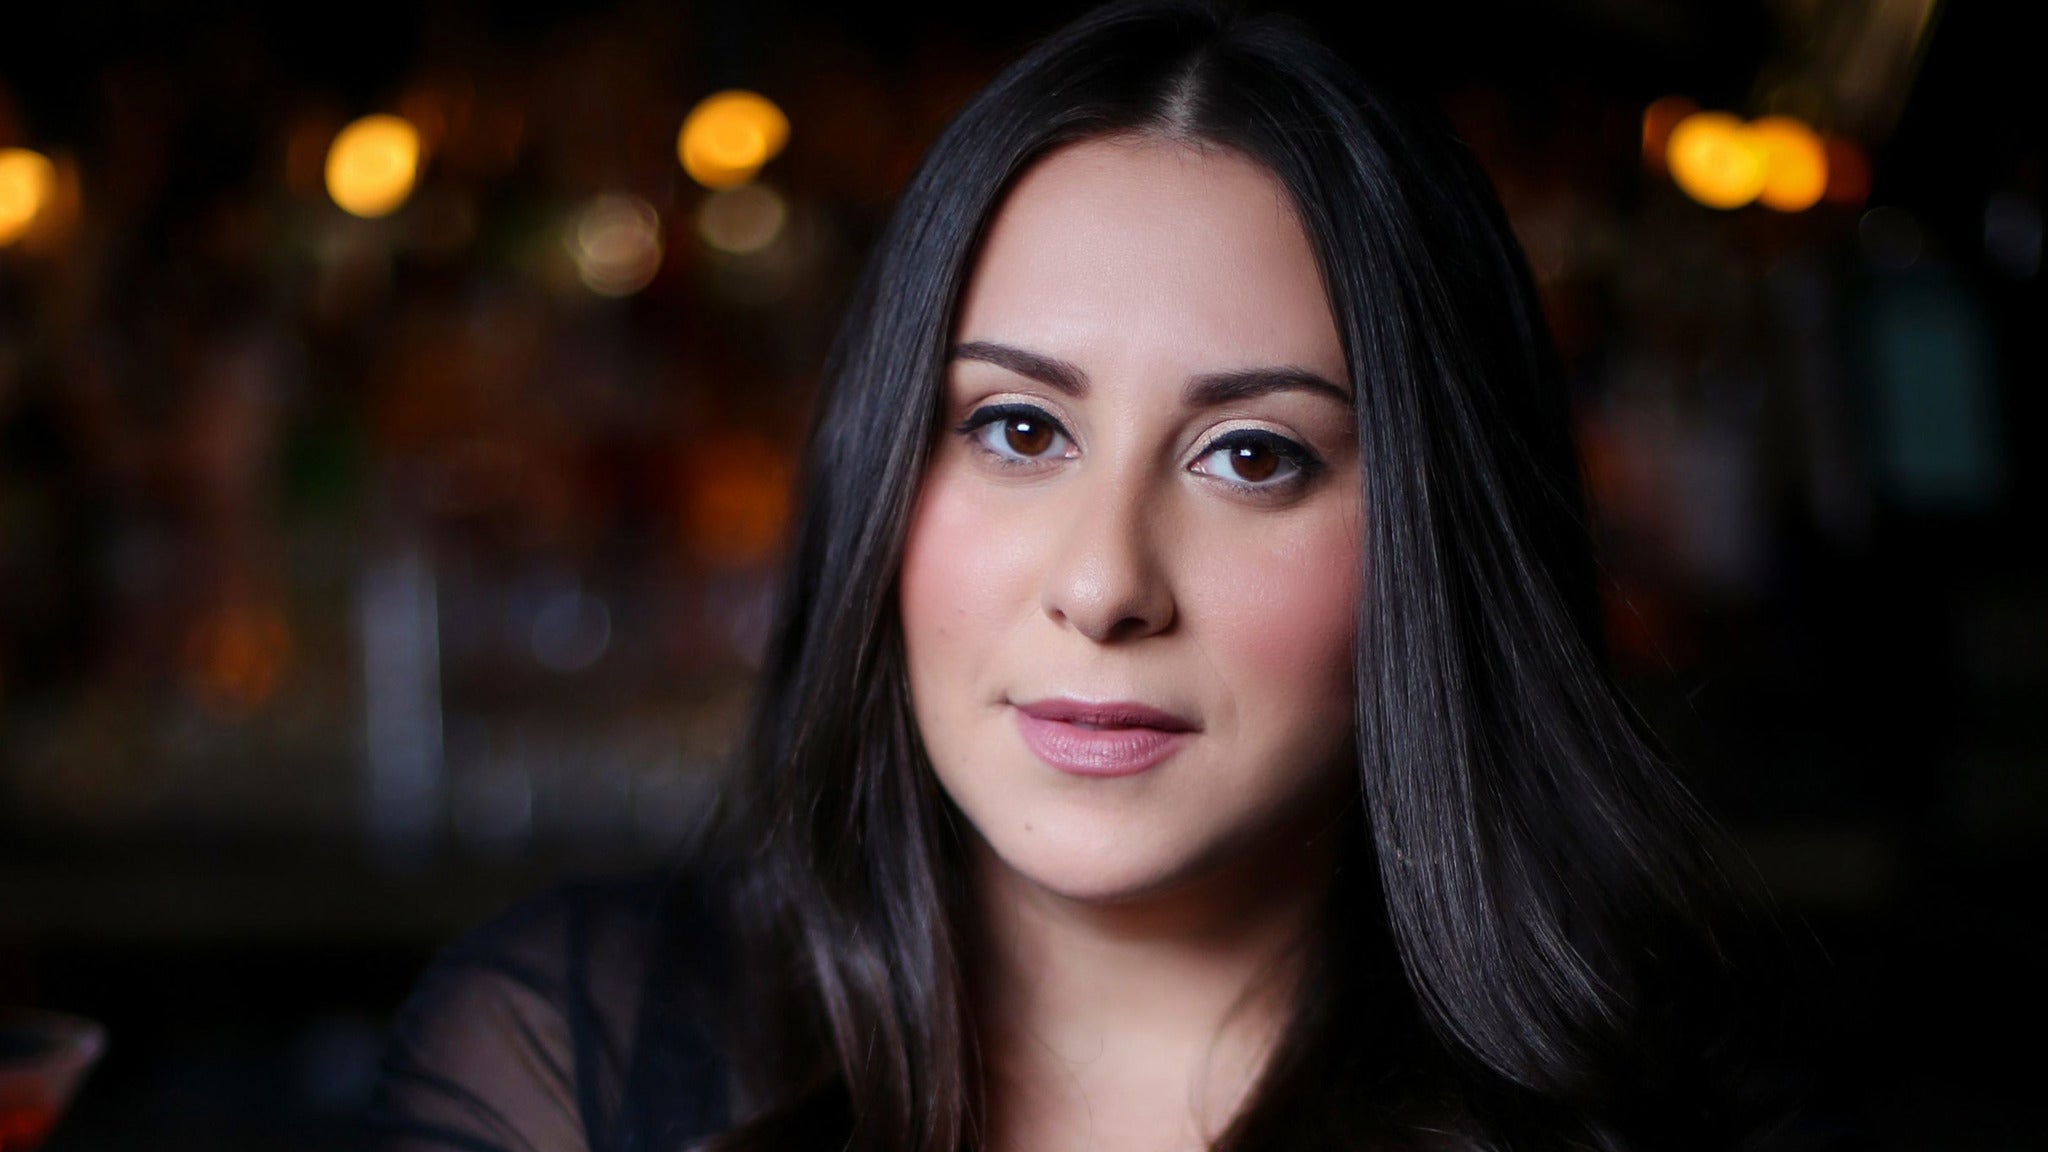 Claudia Oshry in Englewood promo photo for Artist presale offer code